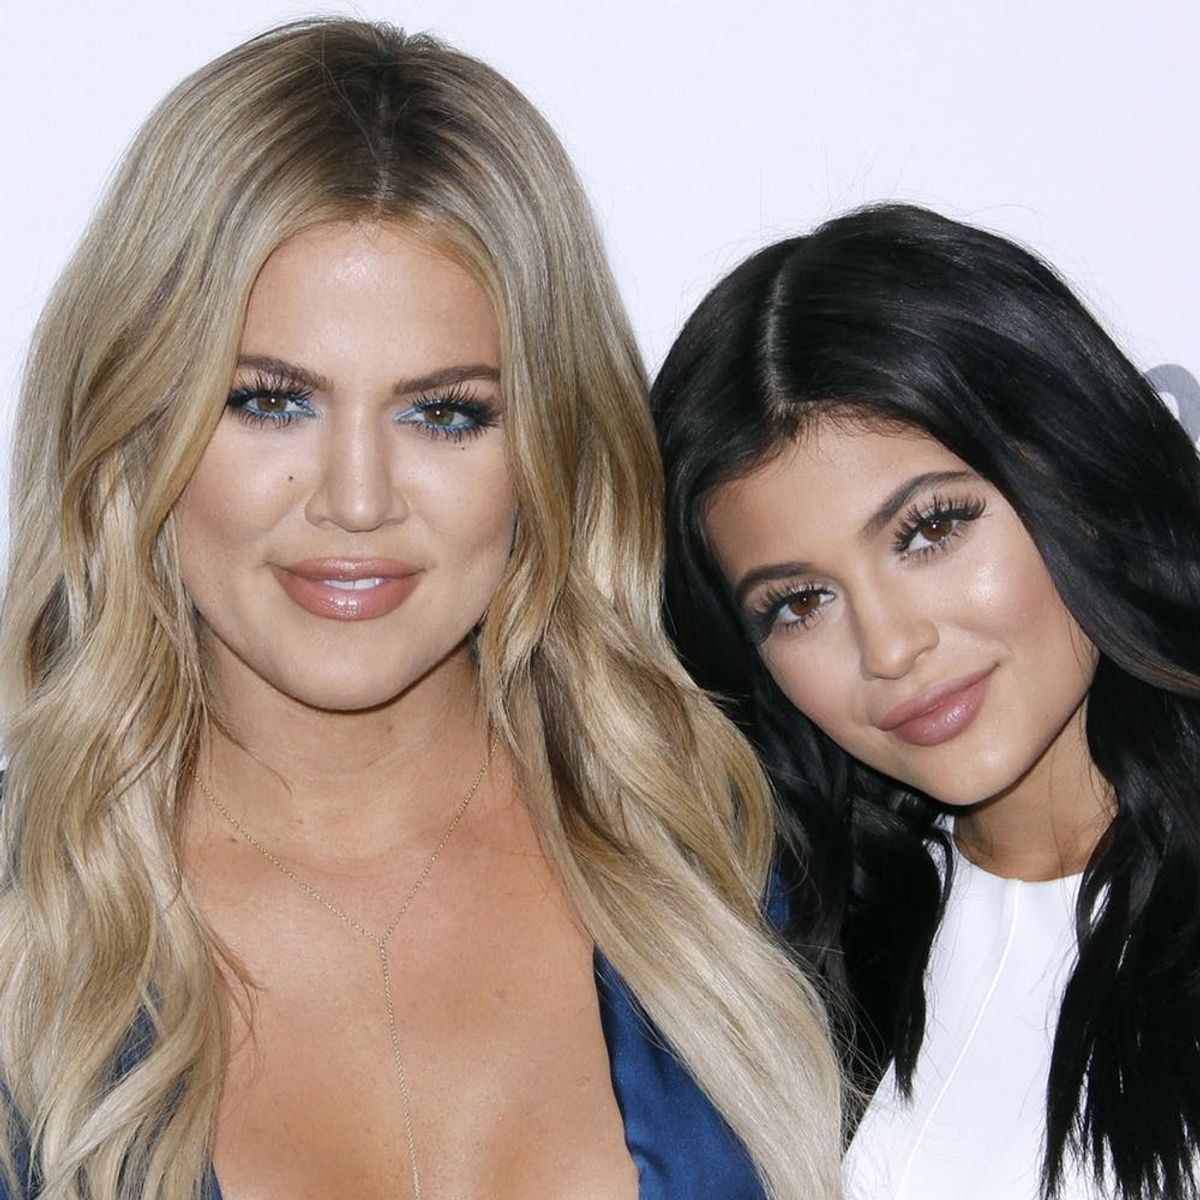 Khloé Kardashian Reveals What It Was Like to Watch Kylie Jenner Give Birth